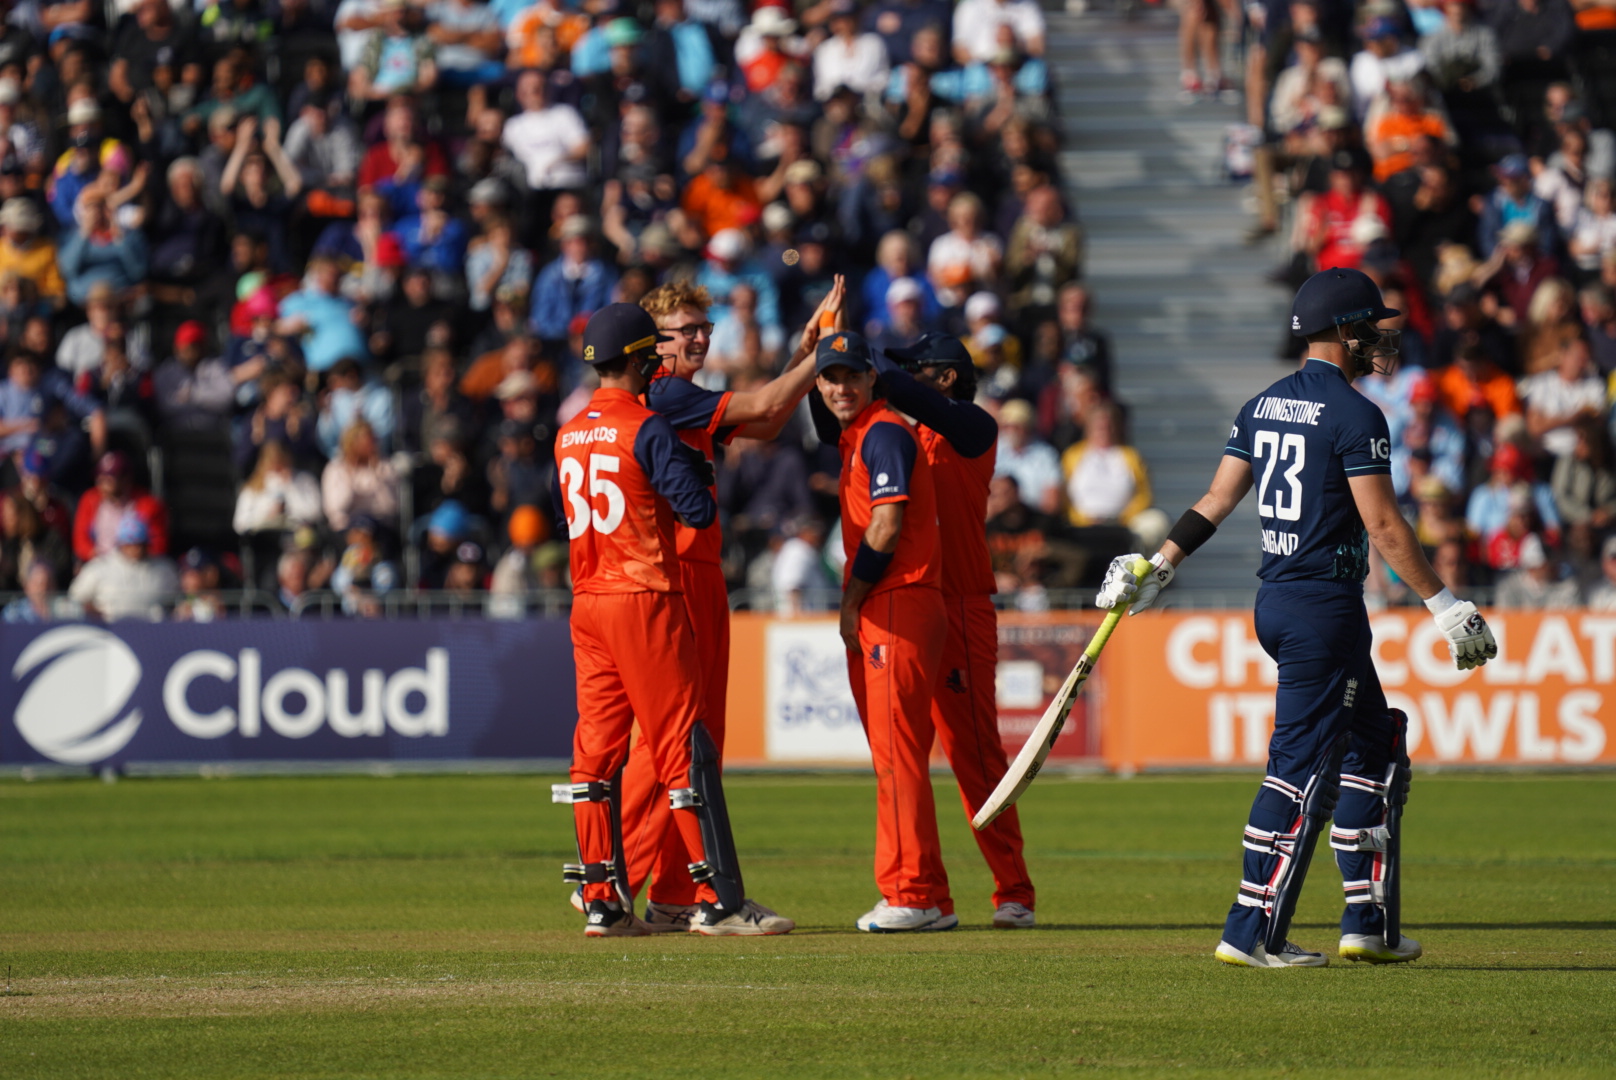 NED vs ENG: Netherlands vs England Dream11 Prediction, Playing XI, Pitch Report & Injury Update for 3rd ODI